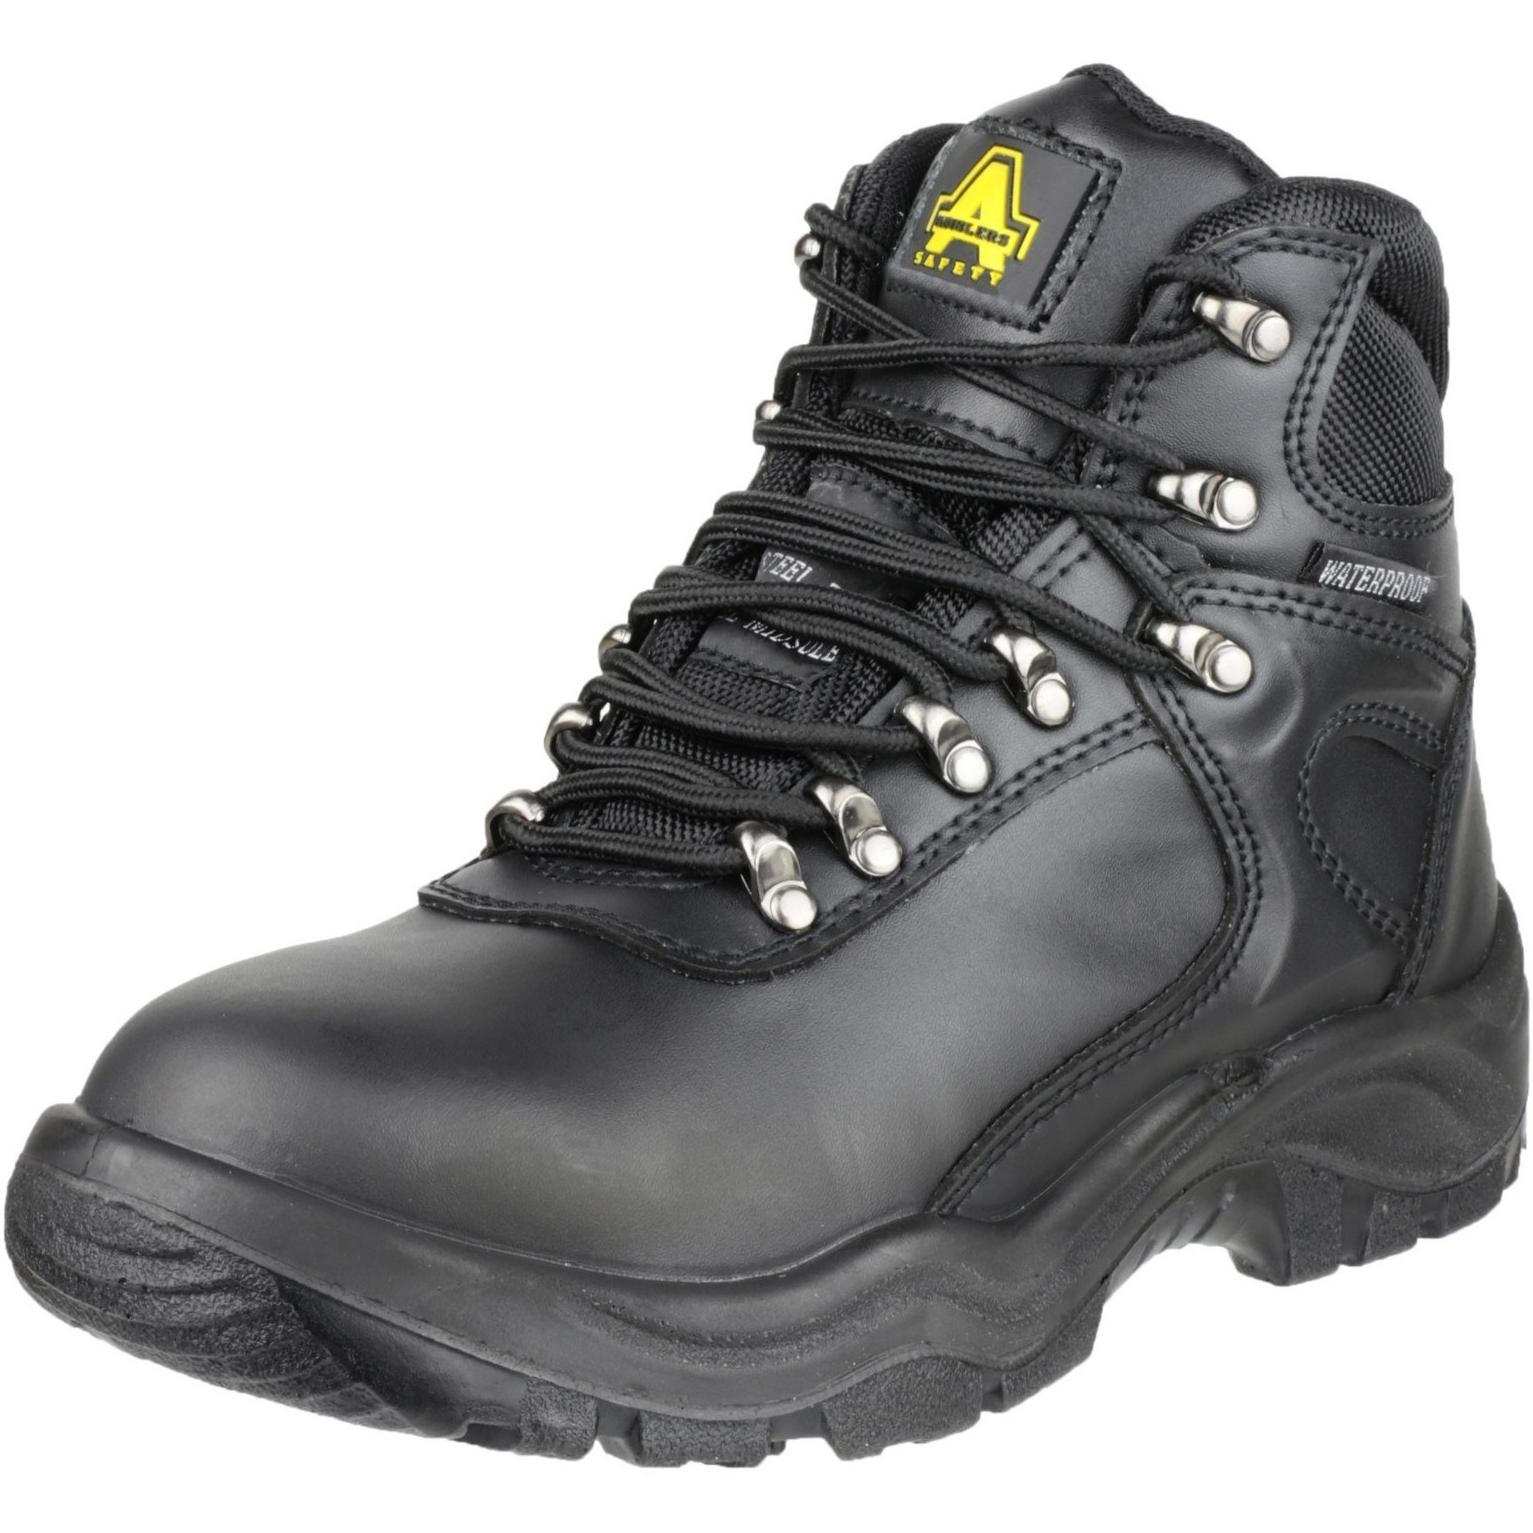 Amblers Safety FS218 Safety Boot